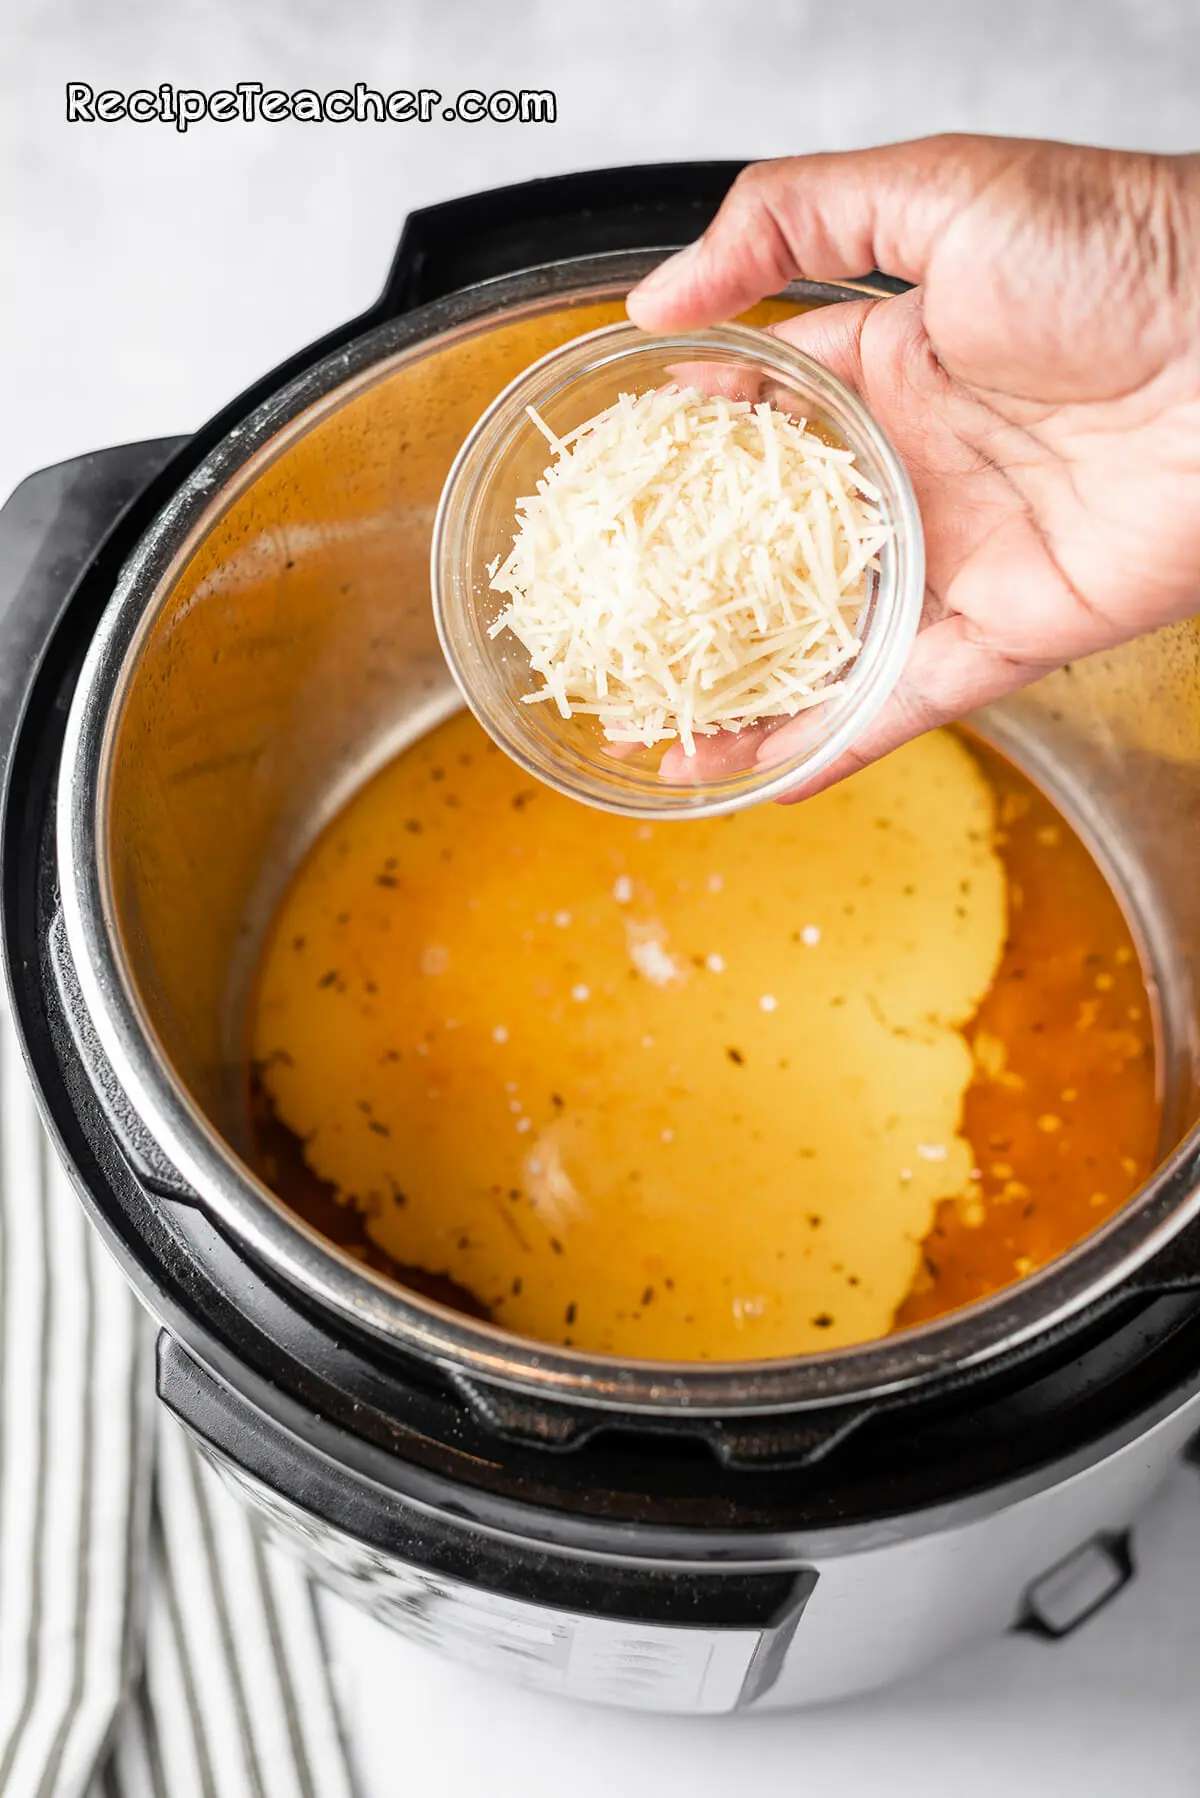 Cooking chicken thighs in an Instant Pot pressure cooker for our creamy garlic chicken thighs recipe.